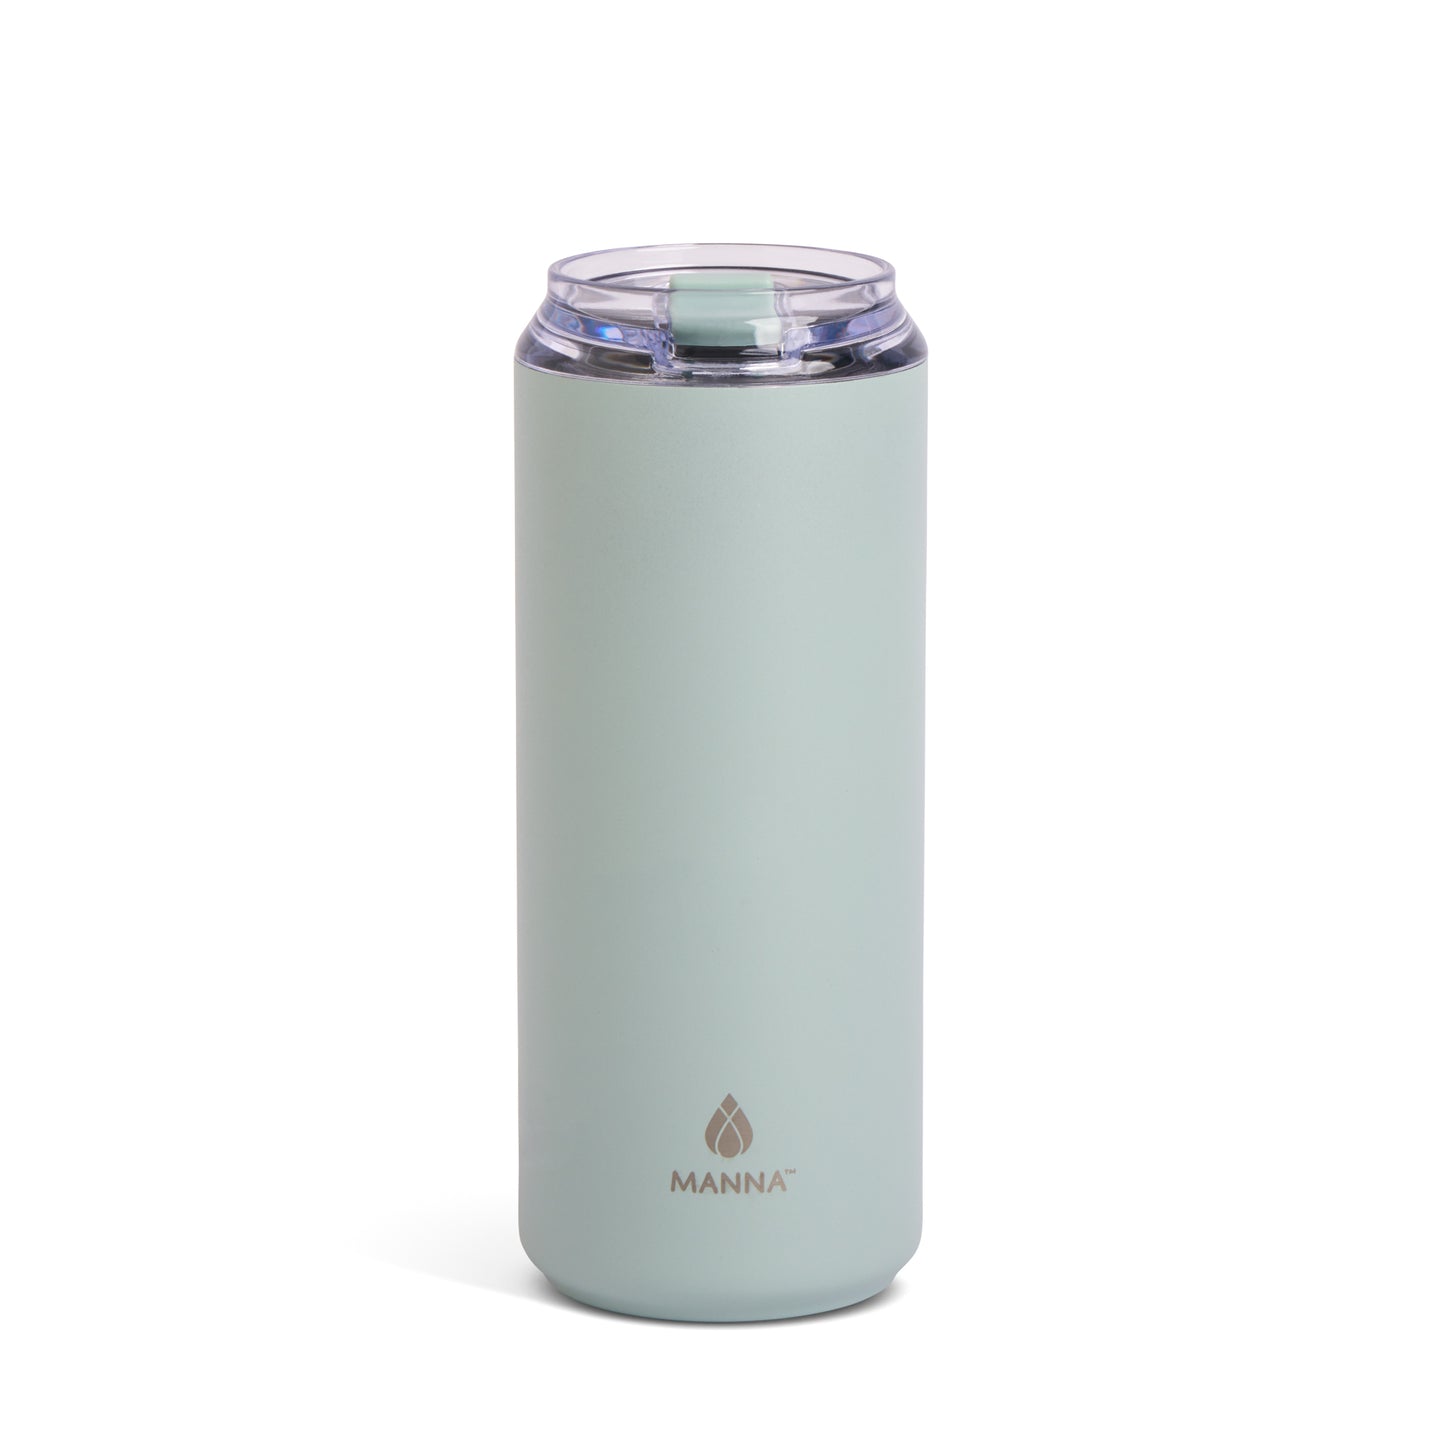 Spencer's Insulated SS Tumbler — Spencer's Coffee